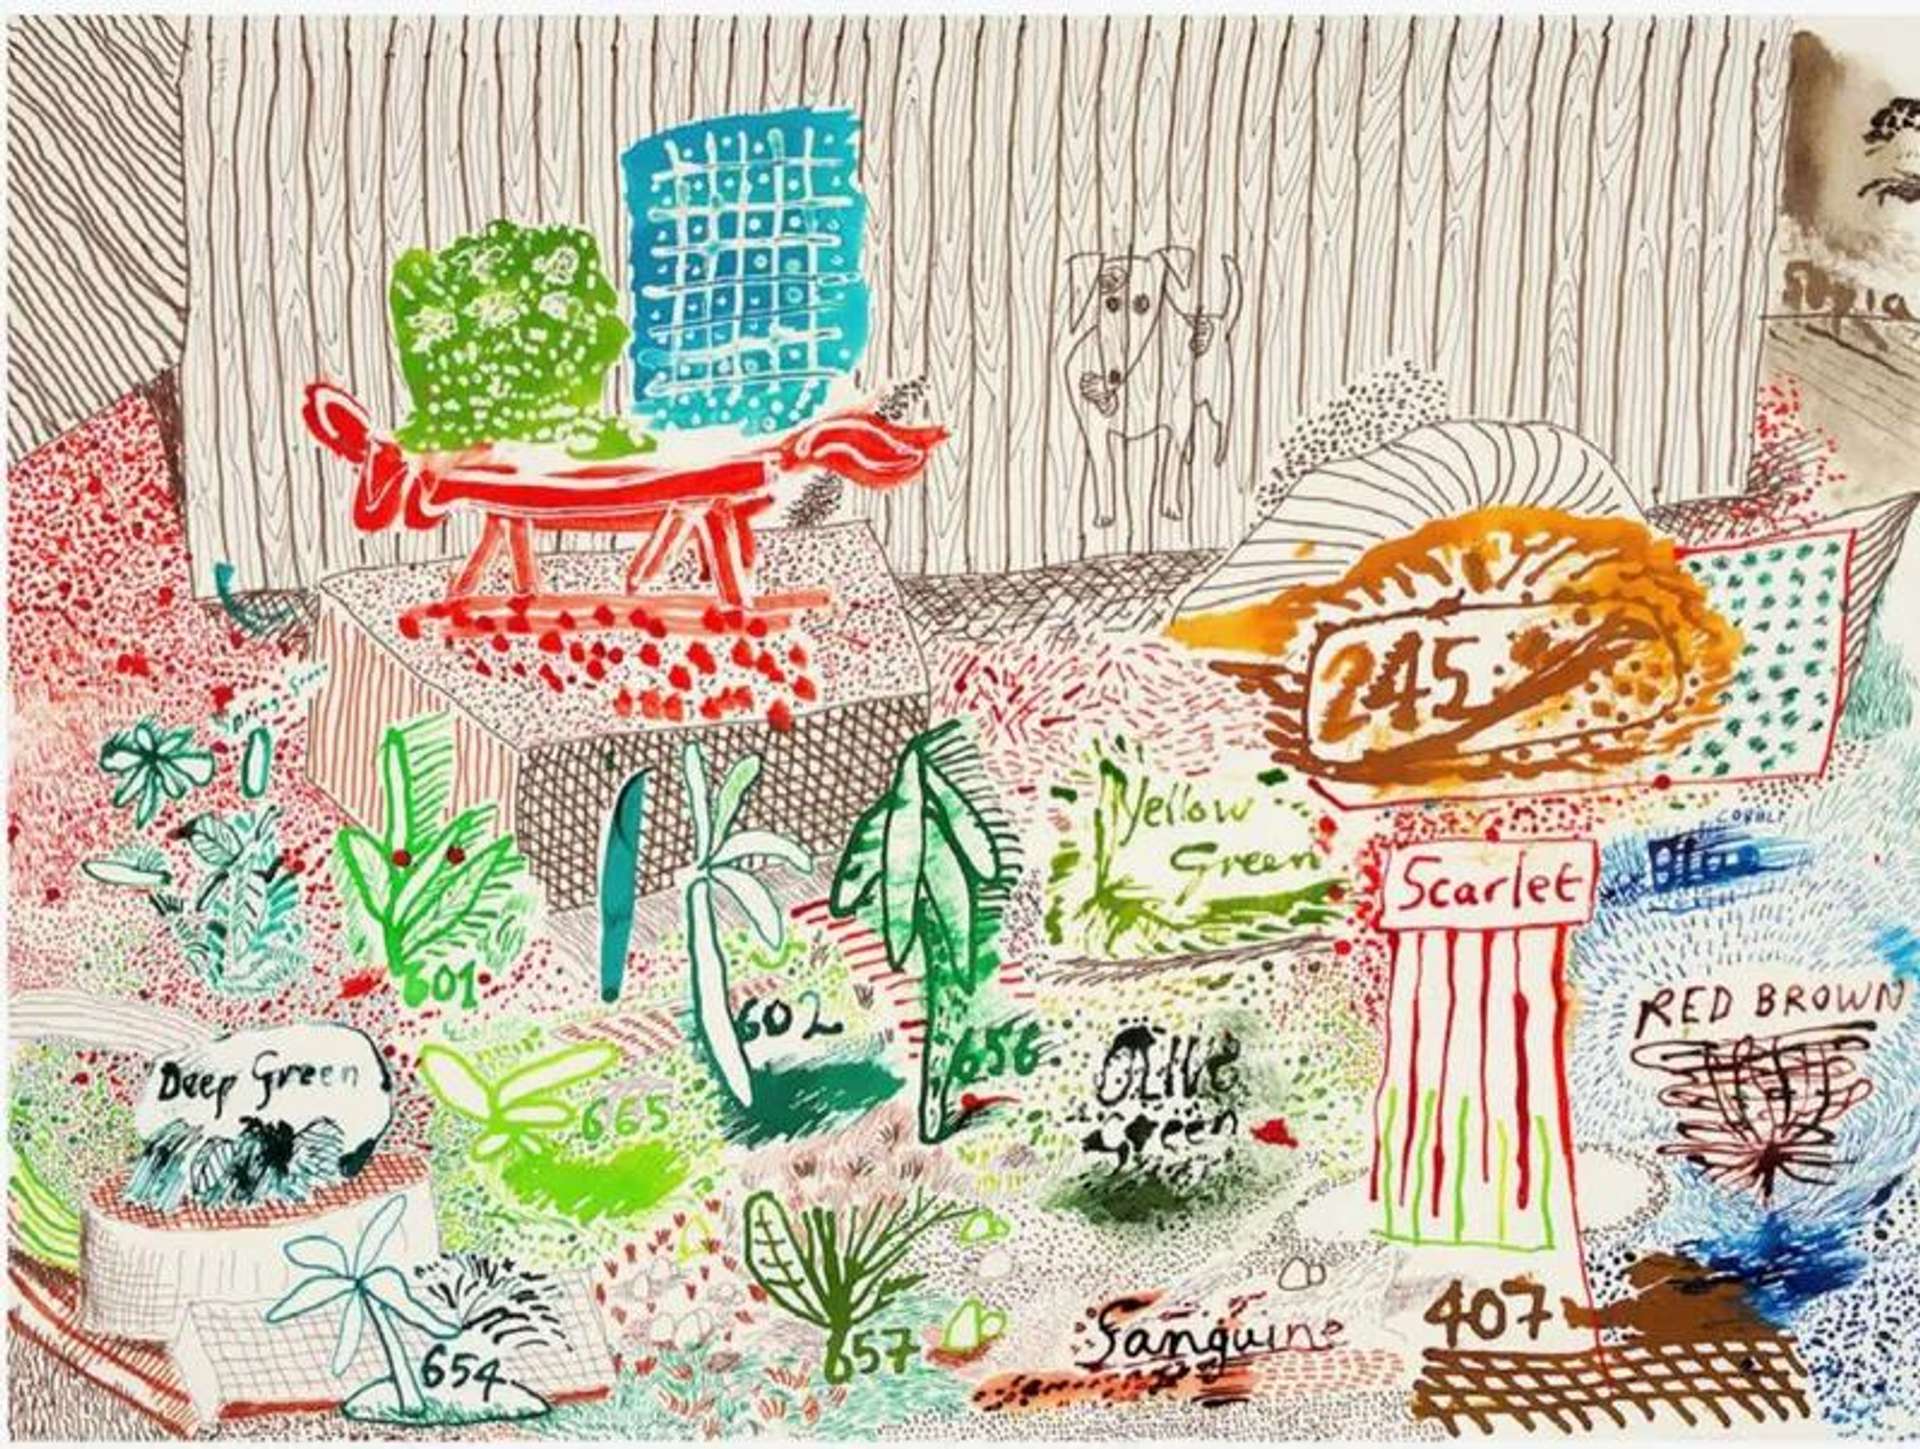 A digital print by David Hockney of an allotment garden with various plants named and numbered drawn in different colours.  